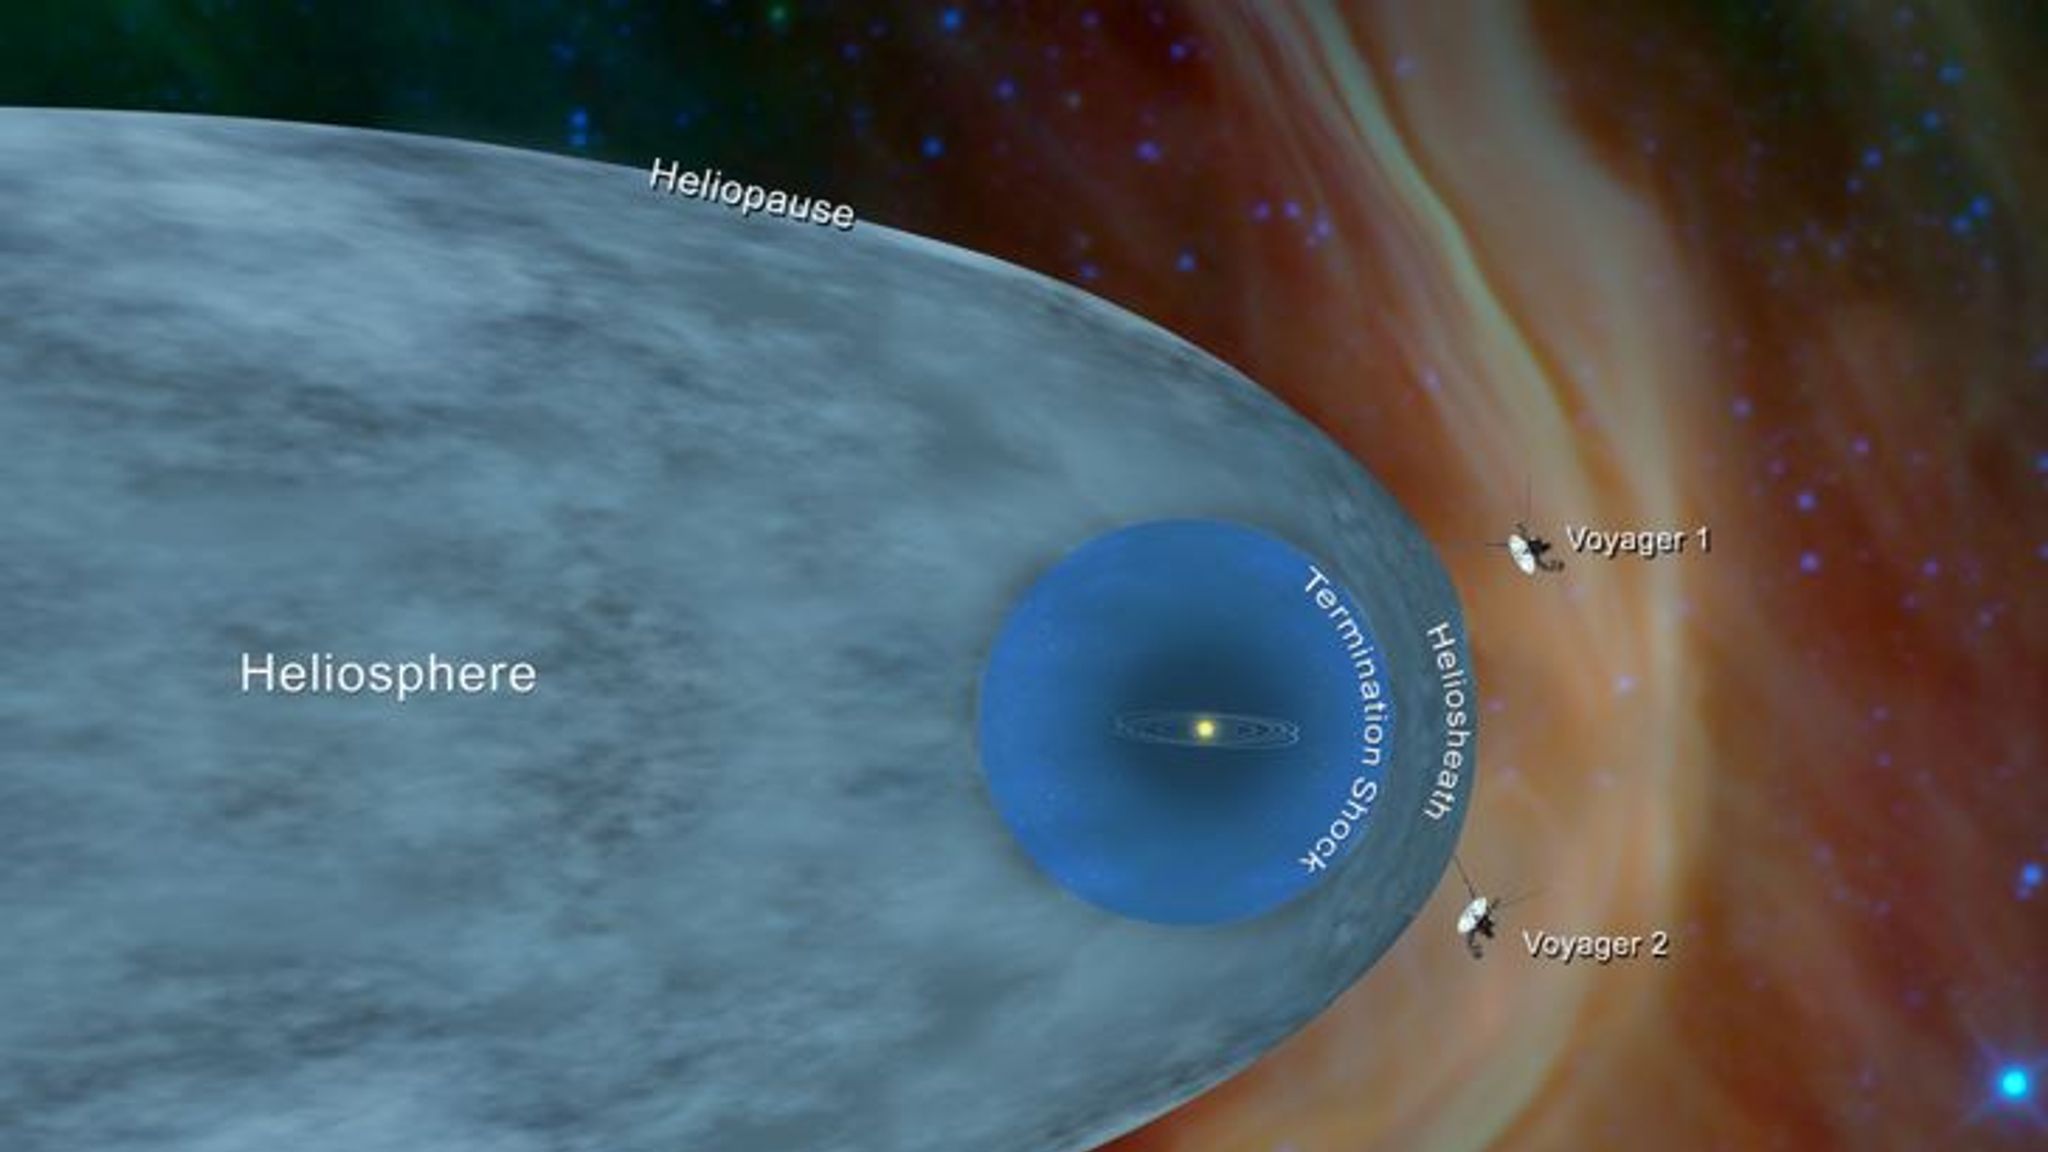 latest data from voyager 2